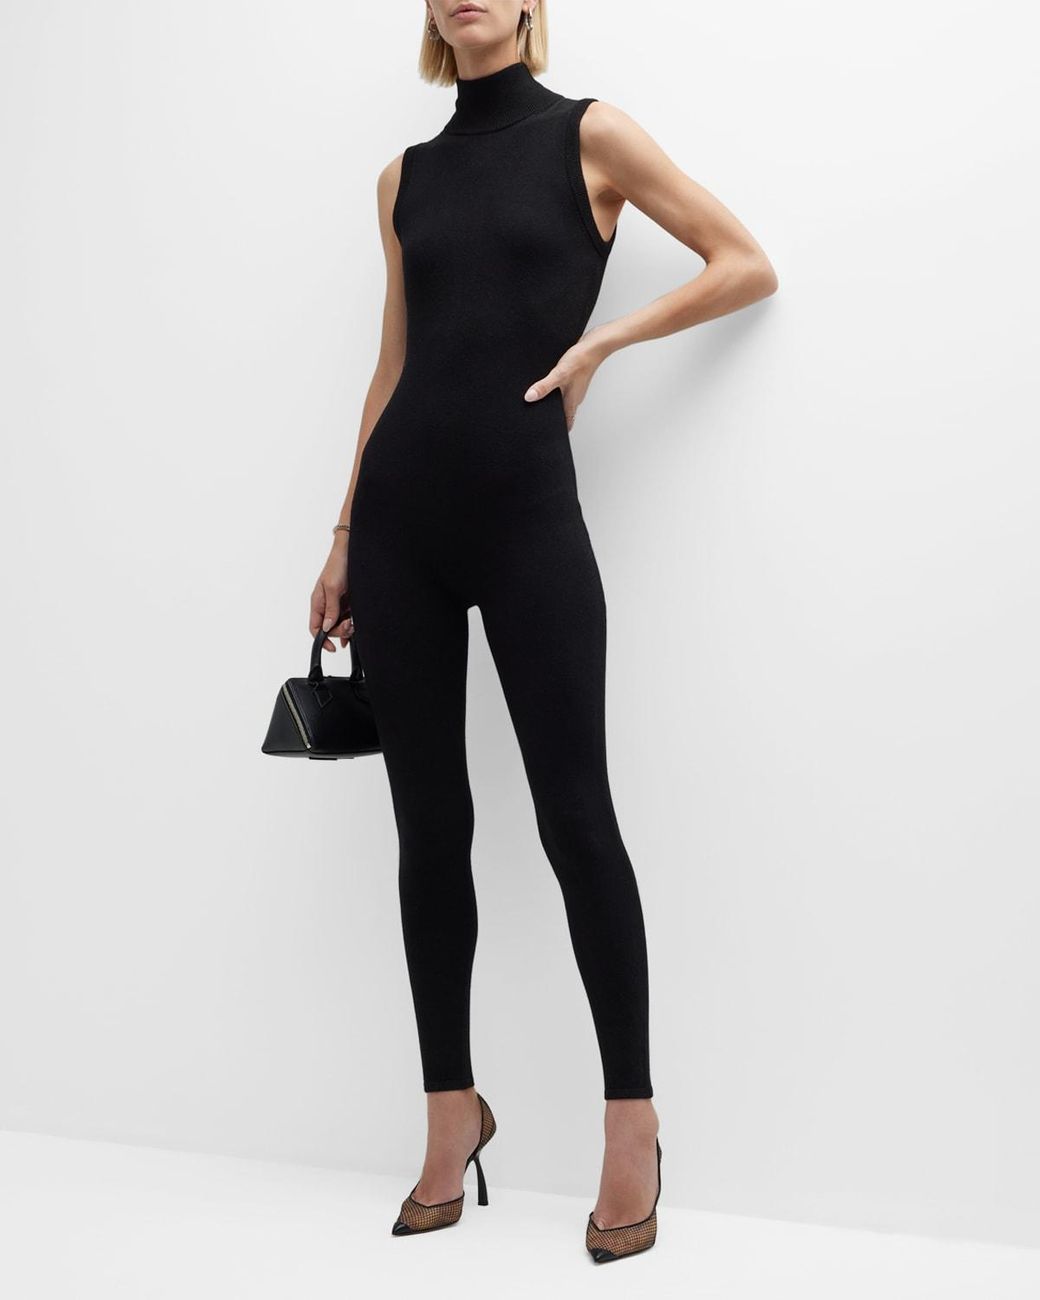 Michael Kors Turtleneck Sleeveless Cashmere Catsuit in White | Lyst